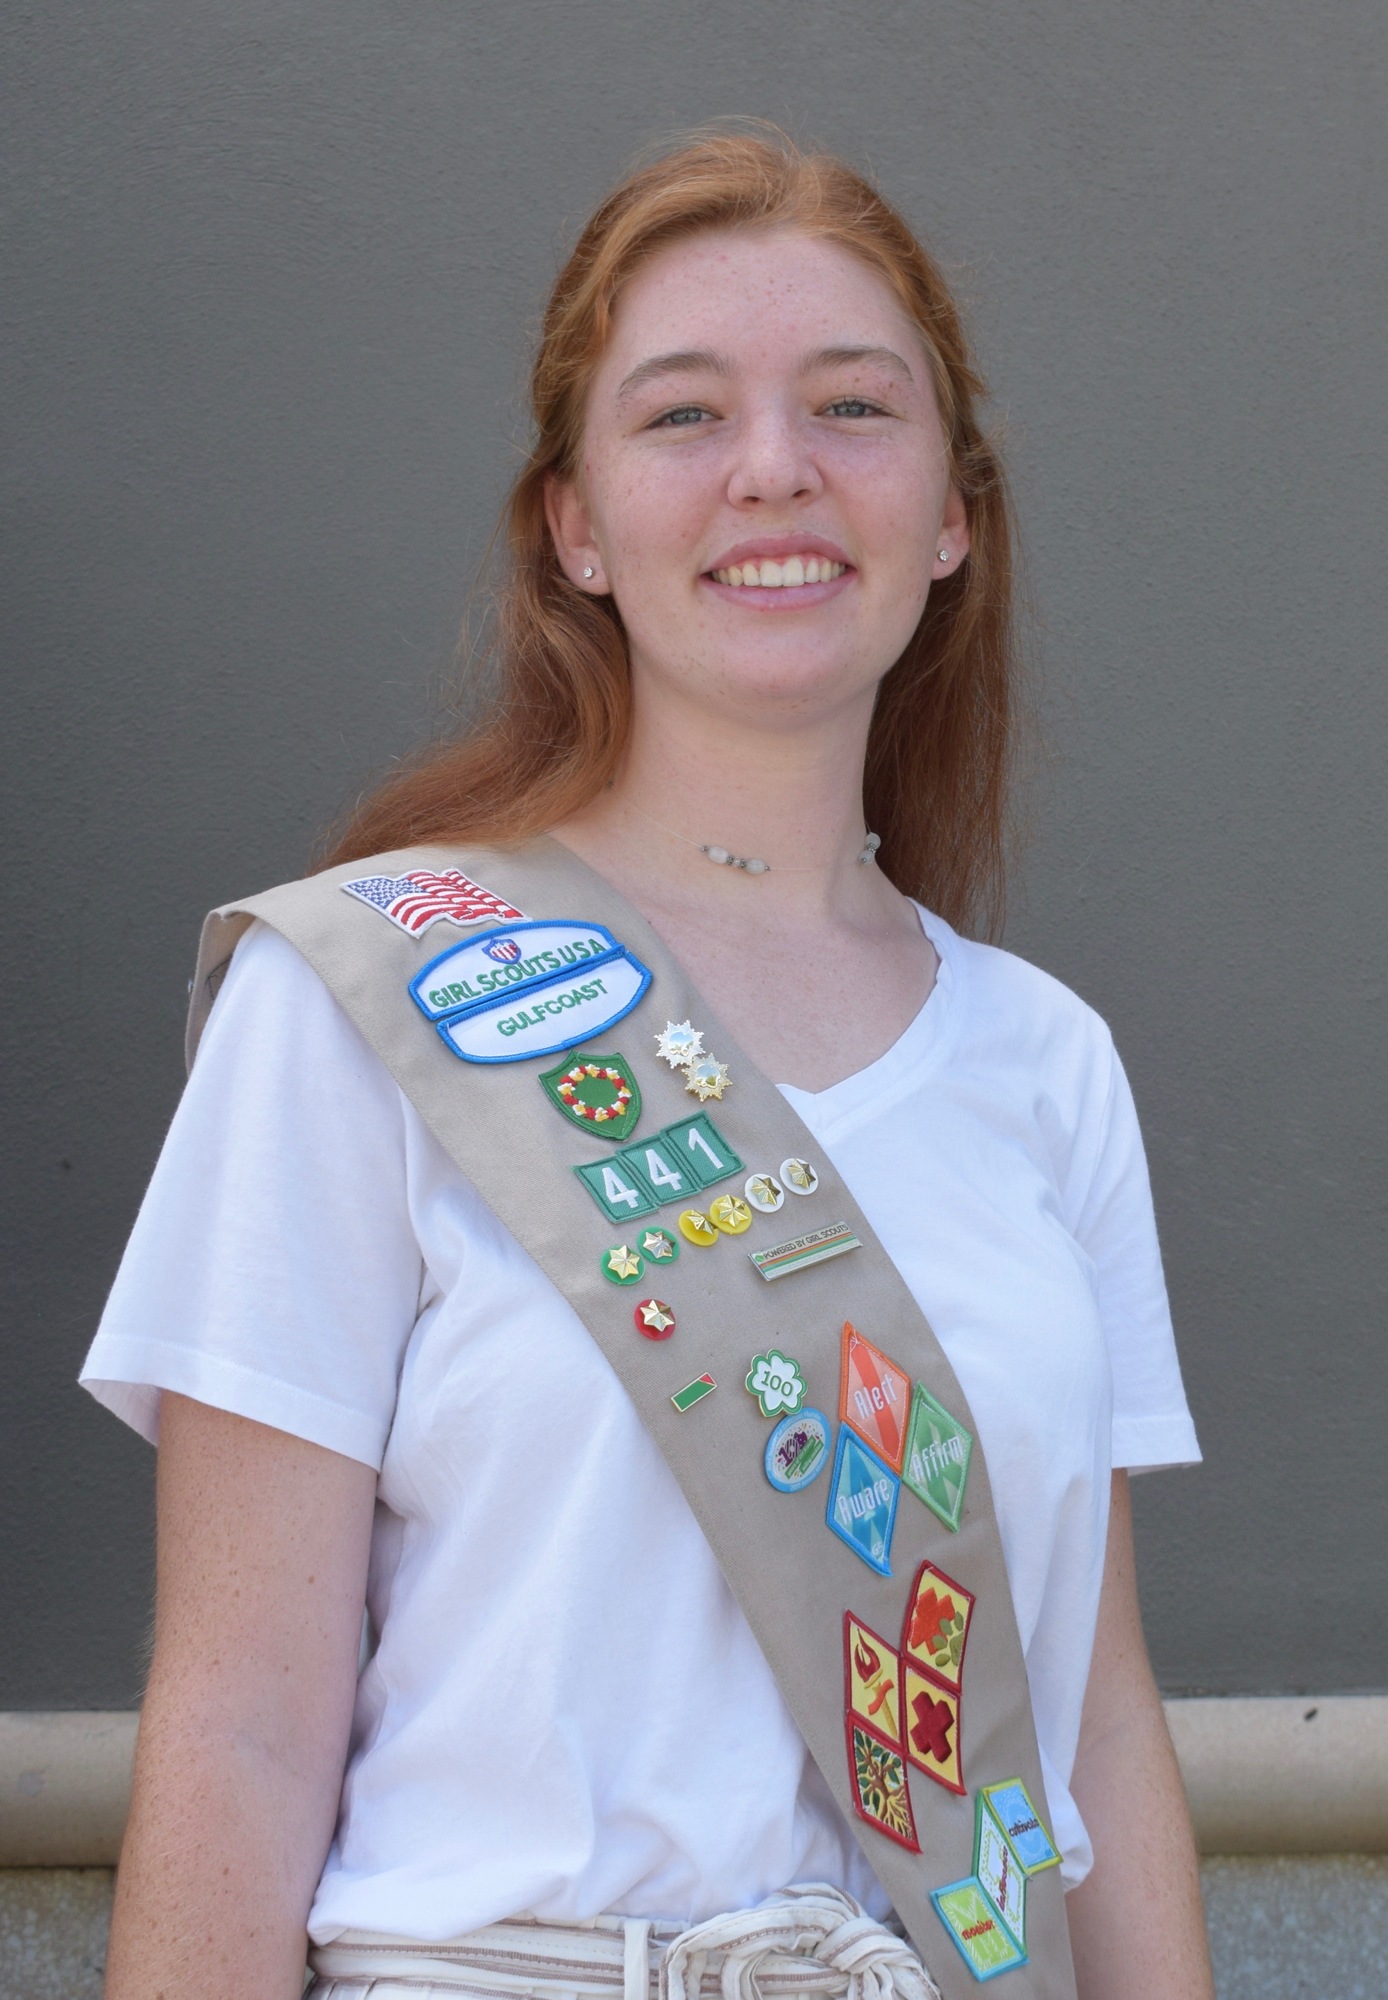 Olivia Townsend earns her Girl Scout Gold Award by creating a Guide to Adulting website. Photo by Liz Ramos.